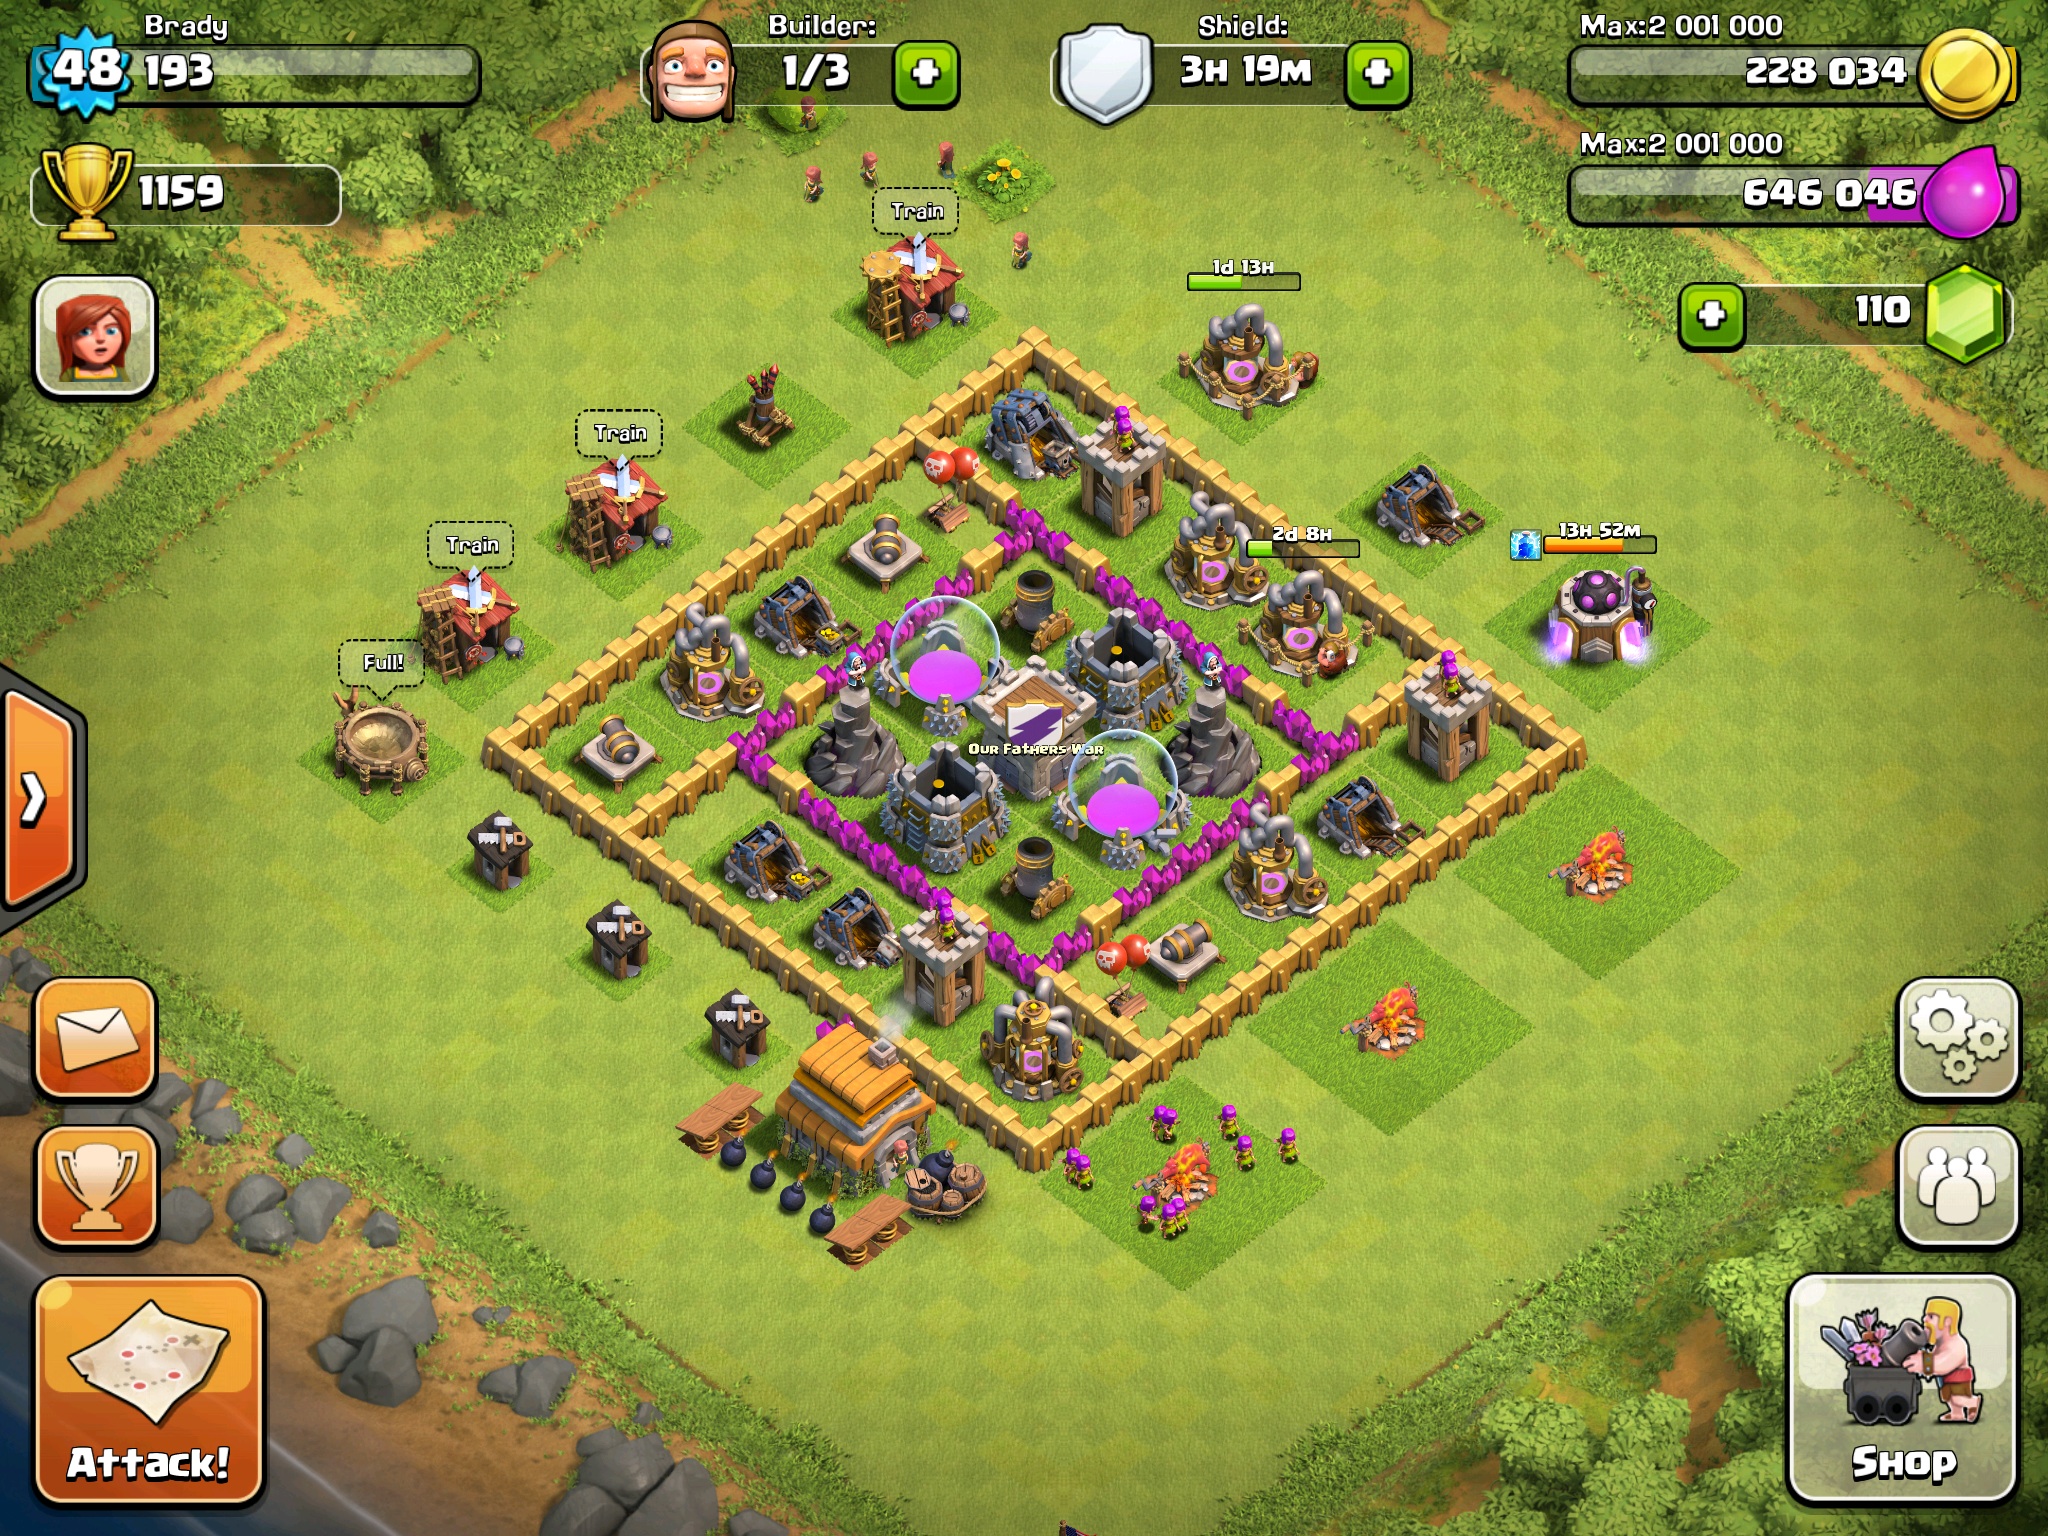 Download Clash of Clans now, available on PC and Mac – FREE